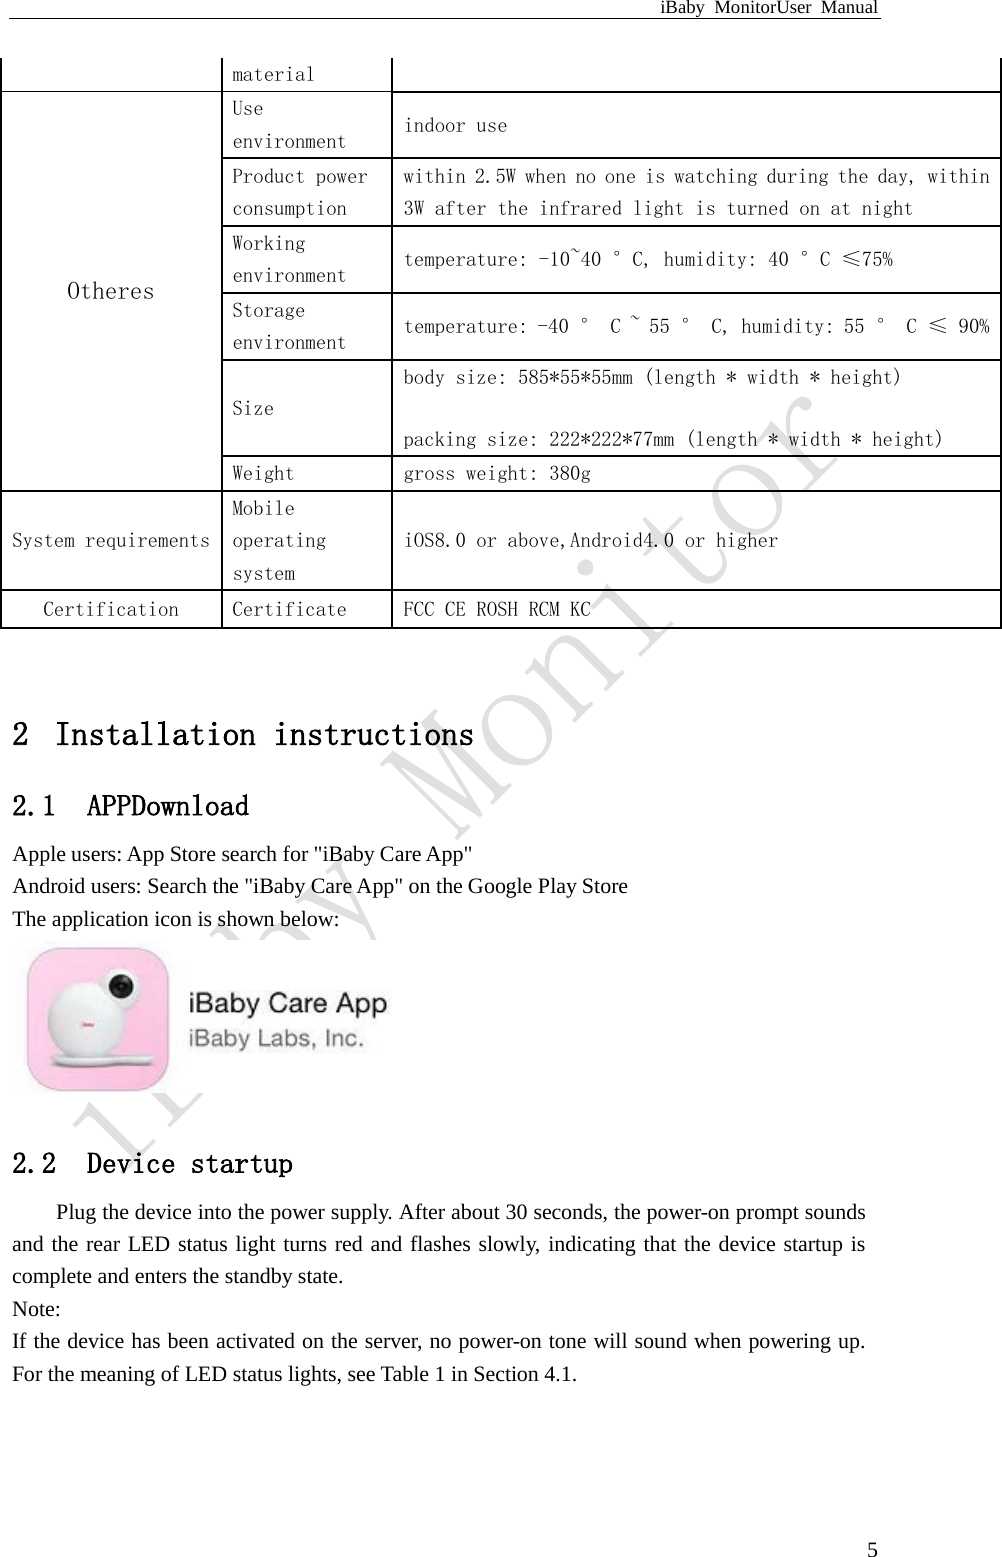 iBaby MonitorUser Manual  5  2 Installation instructions 2.1 APPDownload Apple users: App Store search for &quot;iBaby Care App&quot; Android users: Search the &quot;iBaby Care App&quot; on the Google Play Store The application icon is shown below:   2.2 Device startup Plug the device into the power supply. After about 30 seconds, the power-on prompt sounds and the rear LED status light turns red and flashes slowly, indicating that the device startup is complete and enters the standby state. Note: If the device has been activated on the server, no power-on tone will sound when powering up. For the meaning of LED status lights, see Table 1 in Section 4.1.  material Otheres Use environment indoor use Product power consumption within 2.5W when no one is watching during the day, within 3W after the infrared light is turned on at night Working environment  temperature: -10~40 °C, humidity: 40 °C ≤75% Storage environment temperature: -40 ° C ~ 55 ° C, humidity: 55 ° C ≤ 90% Size body size: 585*55*55mm (length * width * height) packing size: 222*222*77mm (length * width * height) Weight gross weight: 380g System requirements Mobile operating system iOS8.0 or above,Android4.0 or higher Certification Certificate FCC CE ROSH RCM KC 